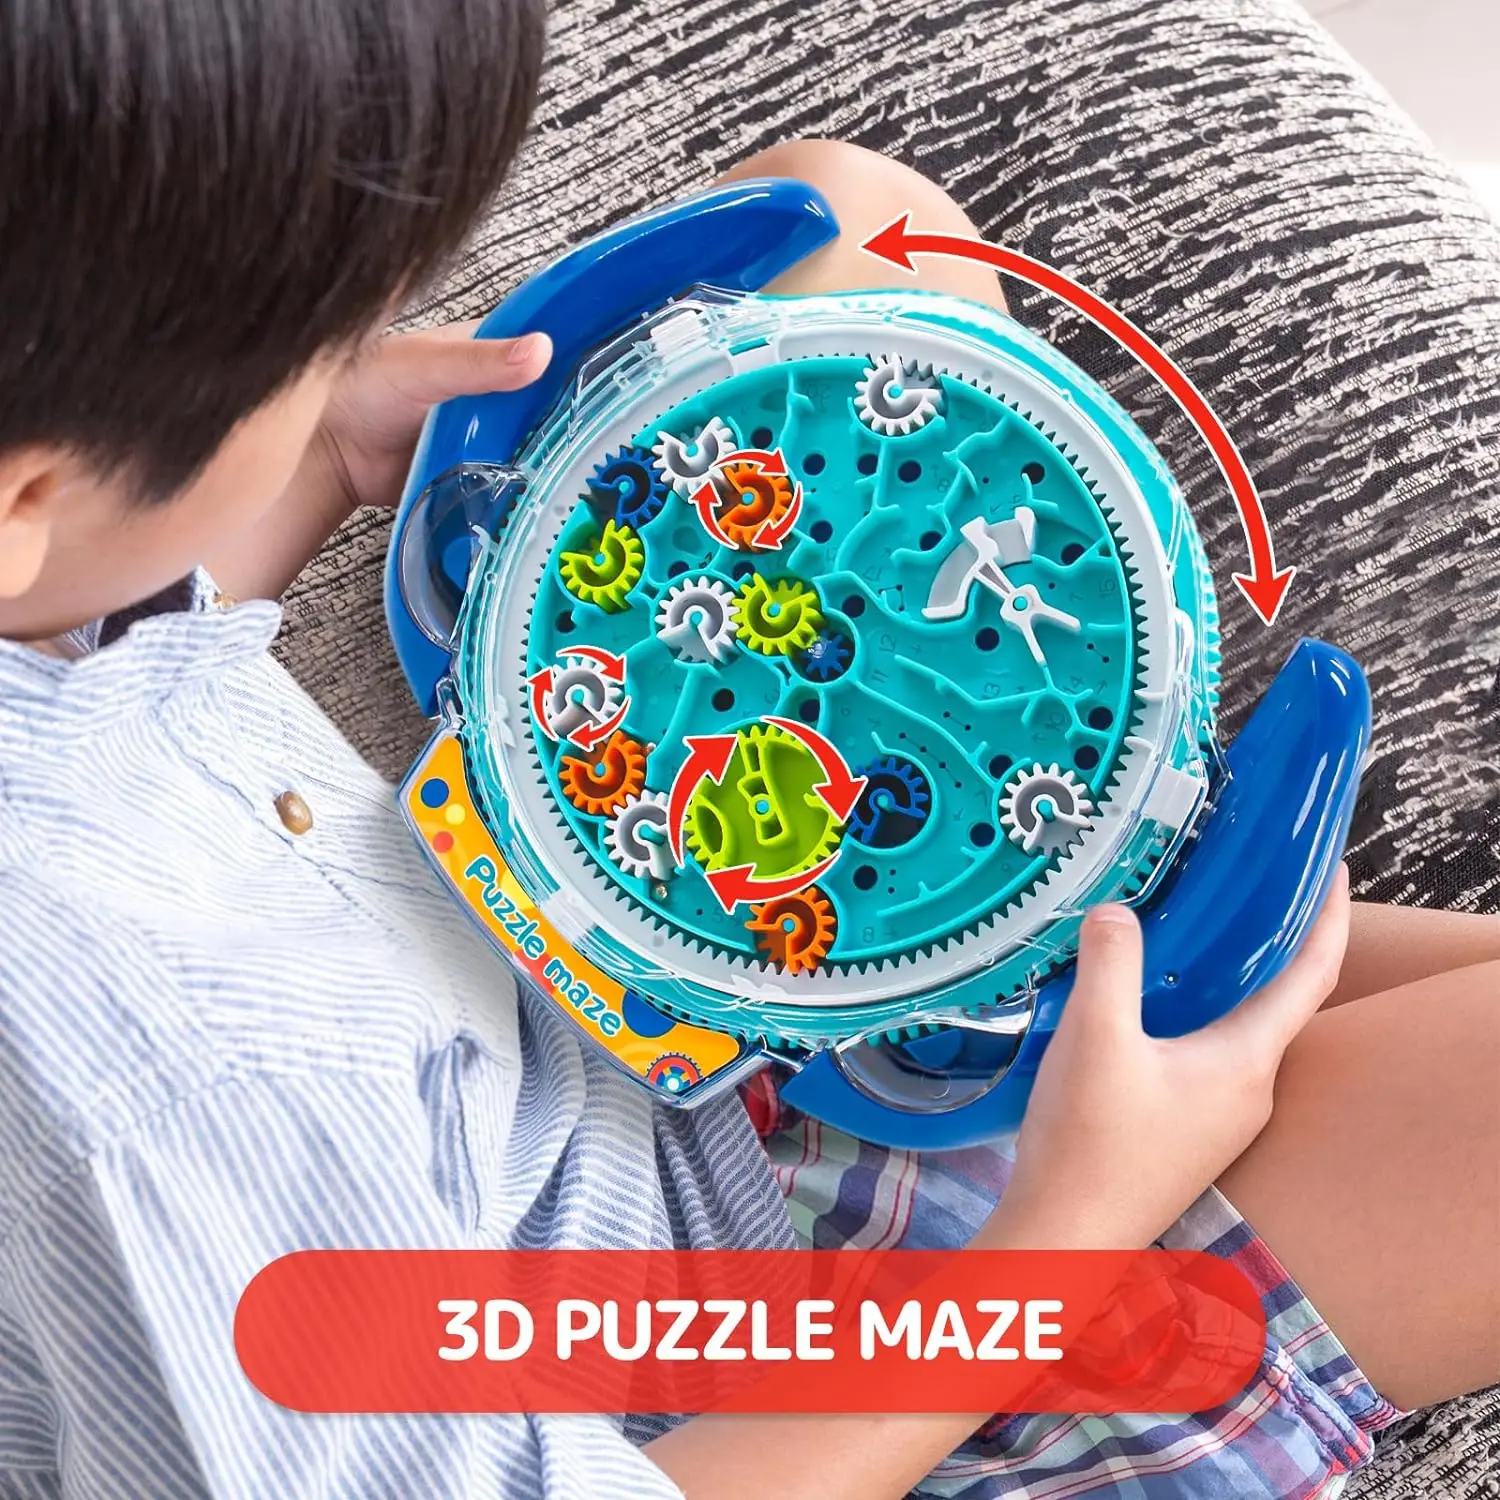 

Mind Puzzles 3D Maze Puzzle Brain Teasers Gravity Ball Game Maze Ball Puzzle Toy Gift for Kids Adults Labyrinth Game Marble Maze